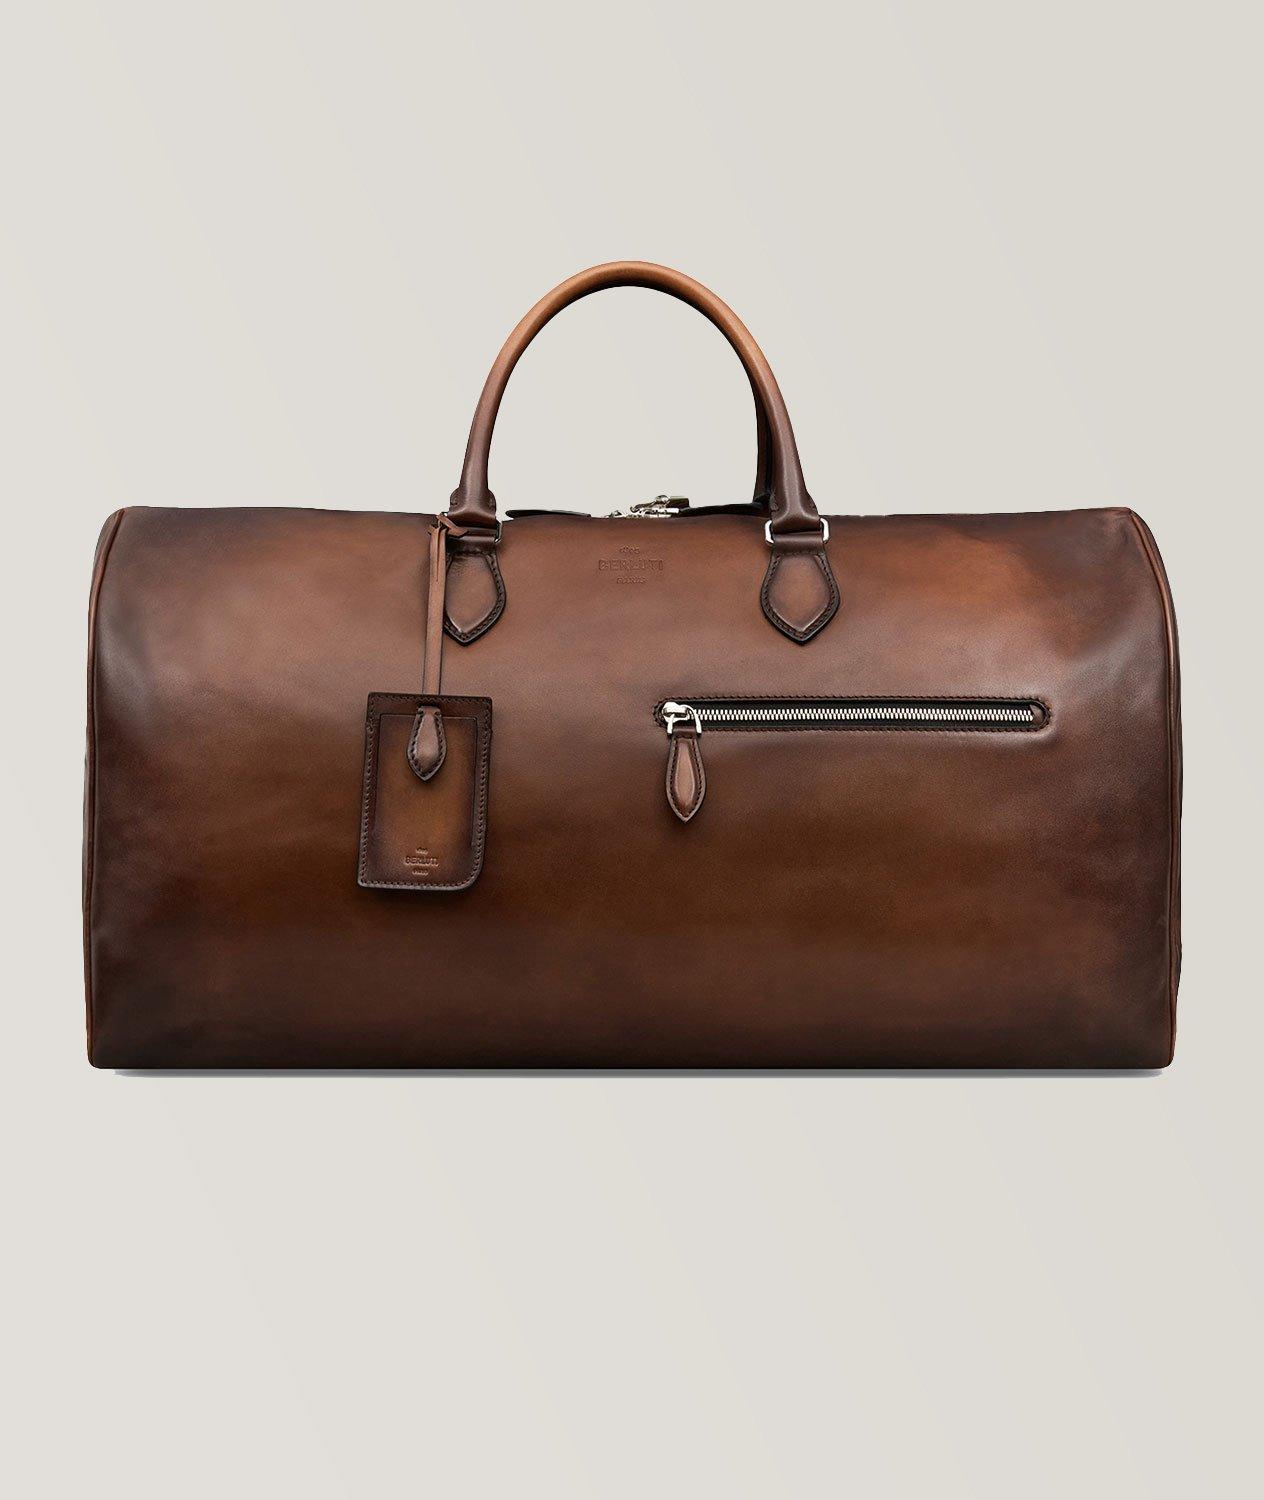 Jour Off GM Leather Travel Bag image 0